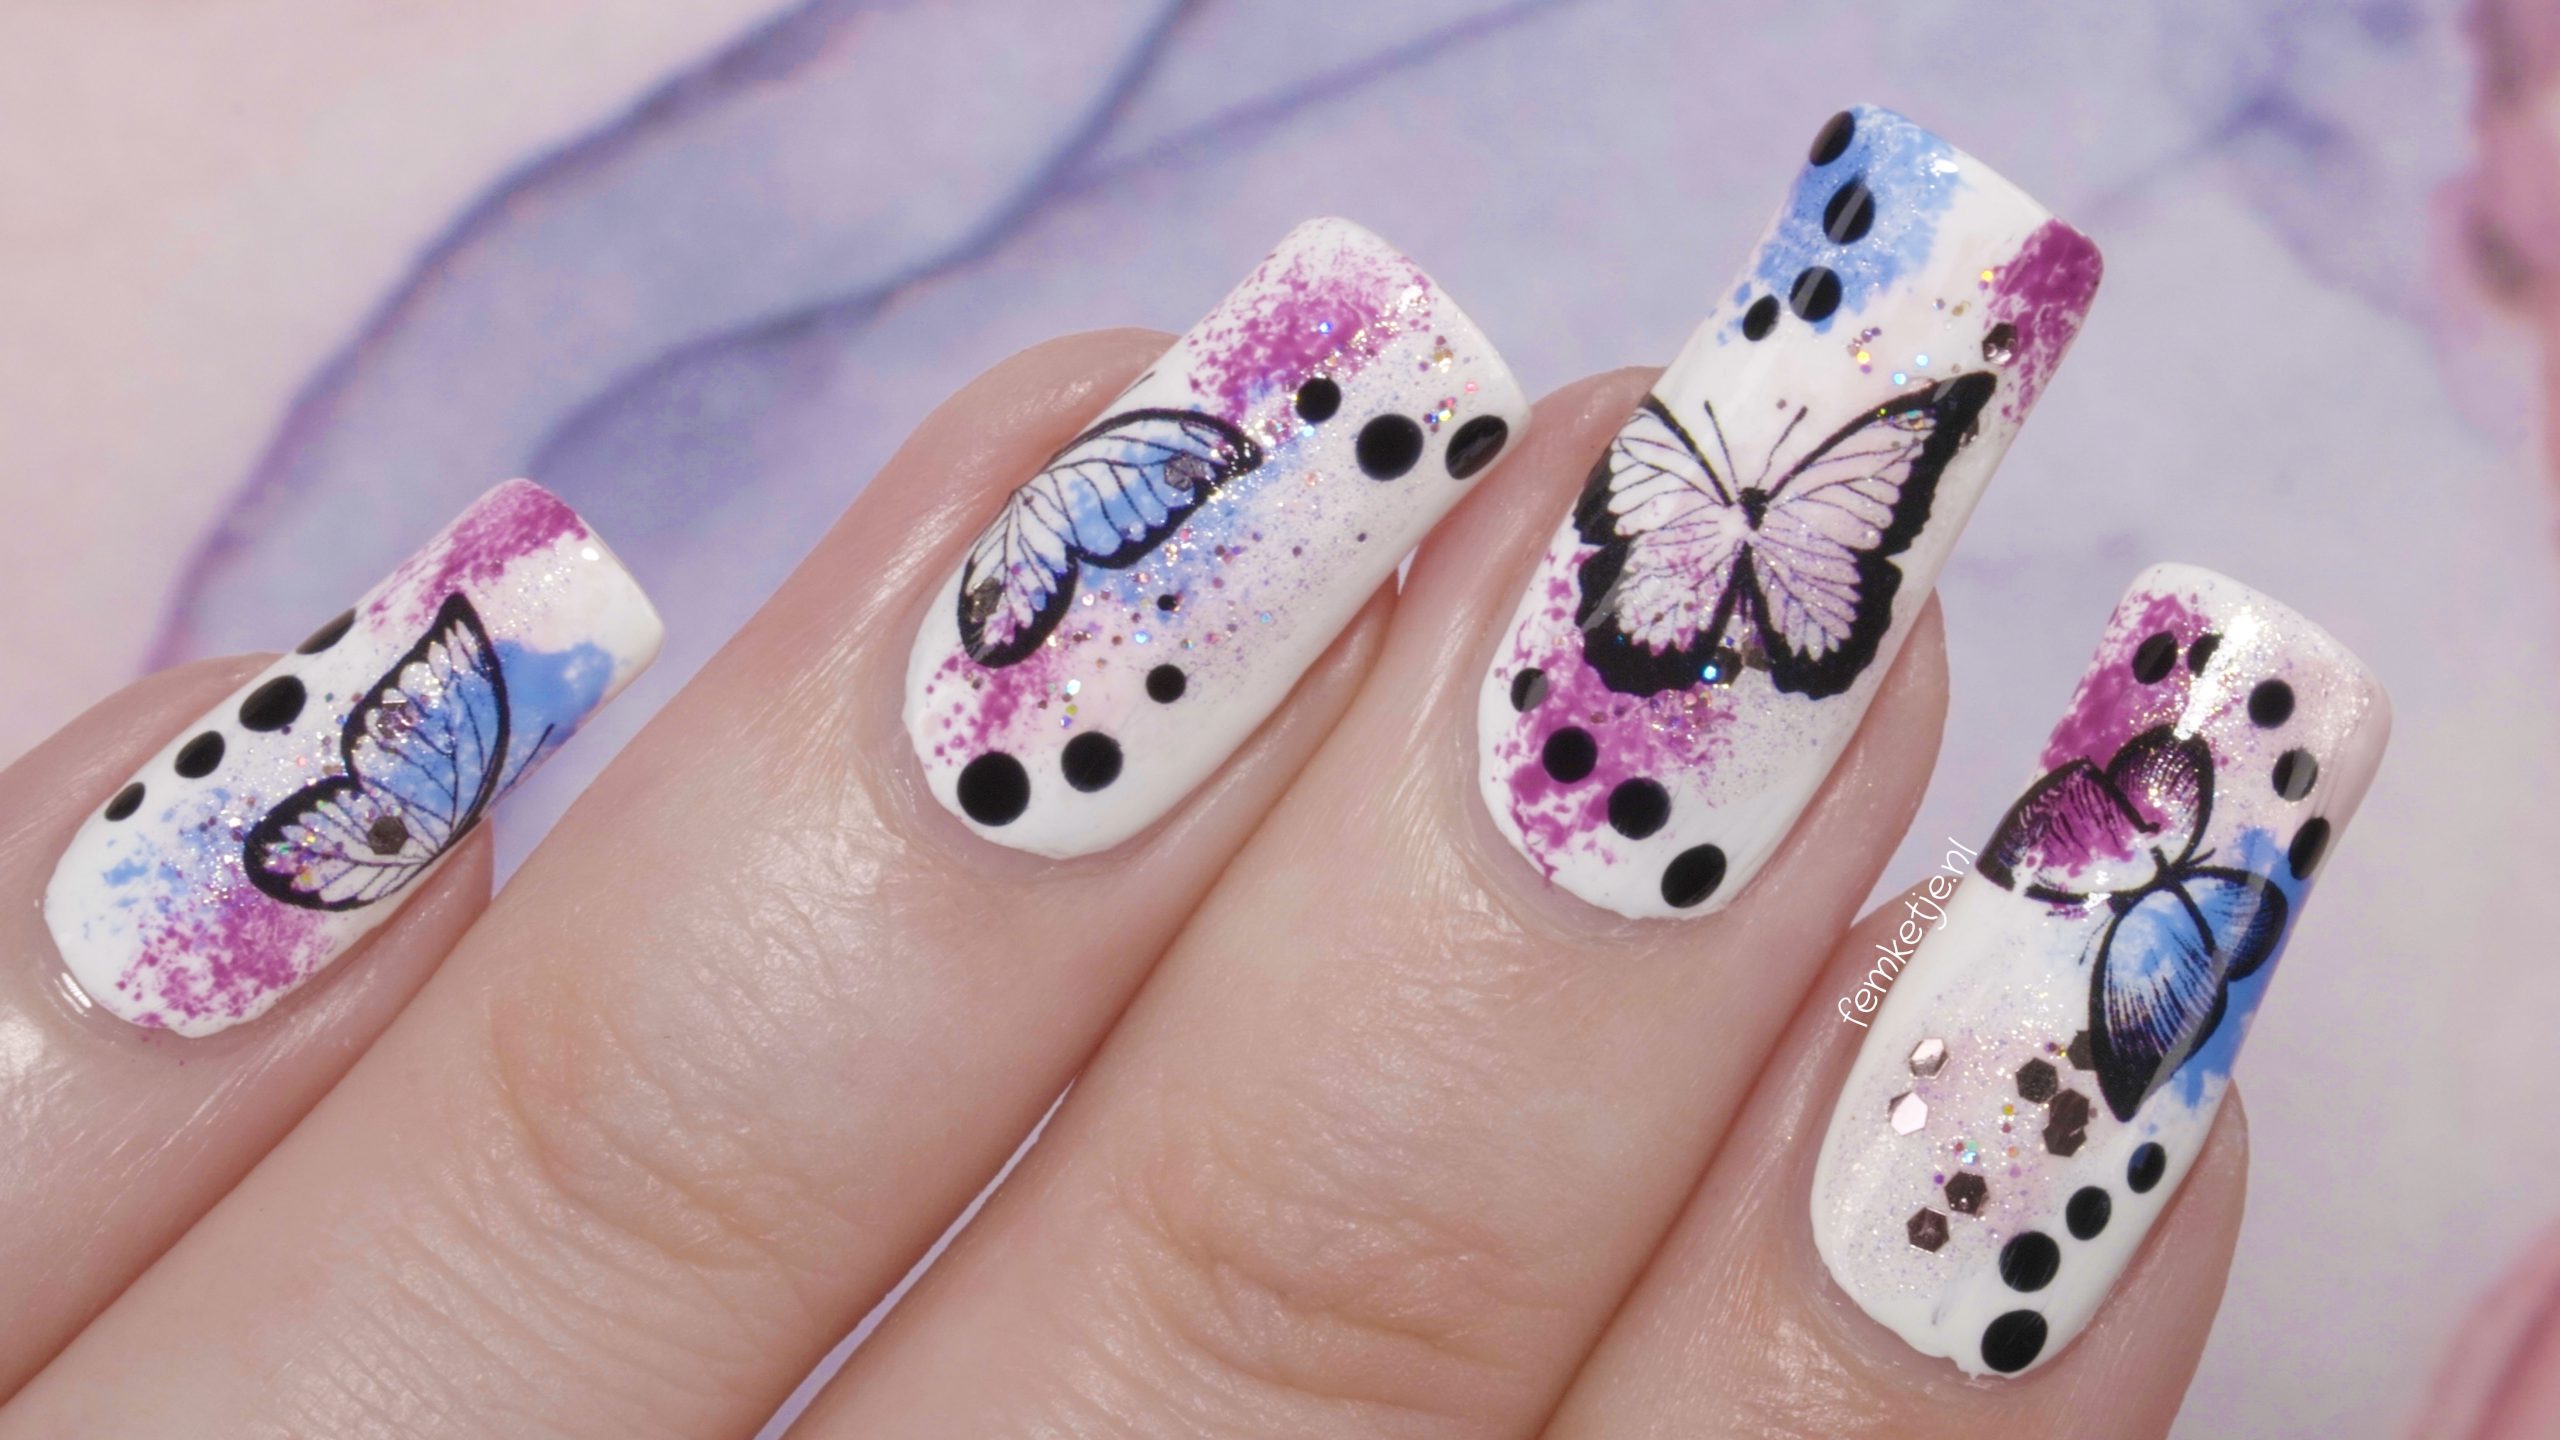 Handpainted Butterfly nail trends gel polish spring summer 2019 nail art   YouTube  Butterfly nail art Nail art Butterfly nail